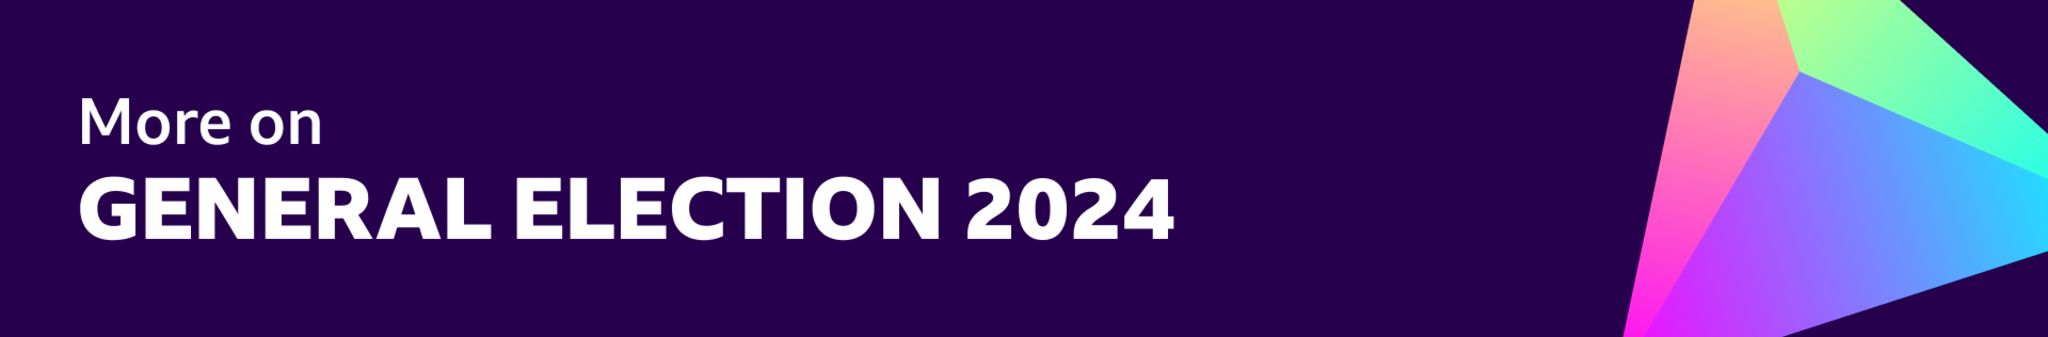 "More on the General Election 2024" banner